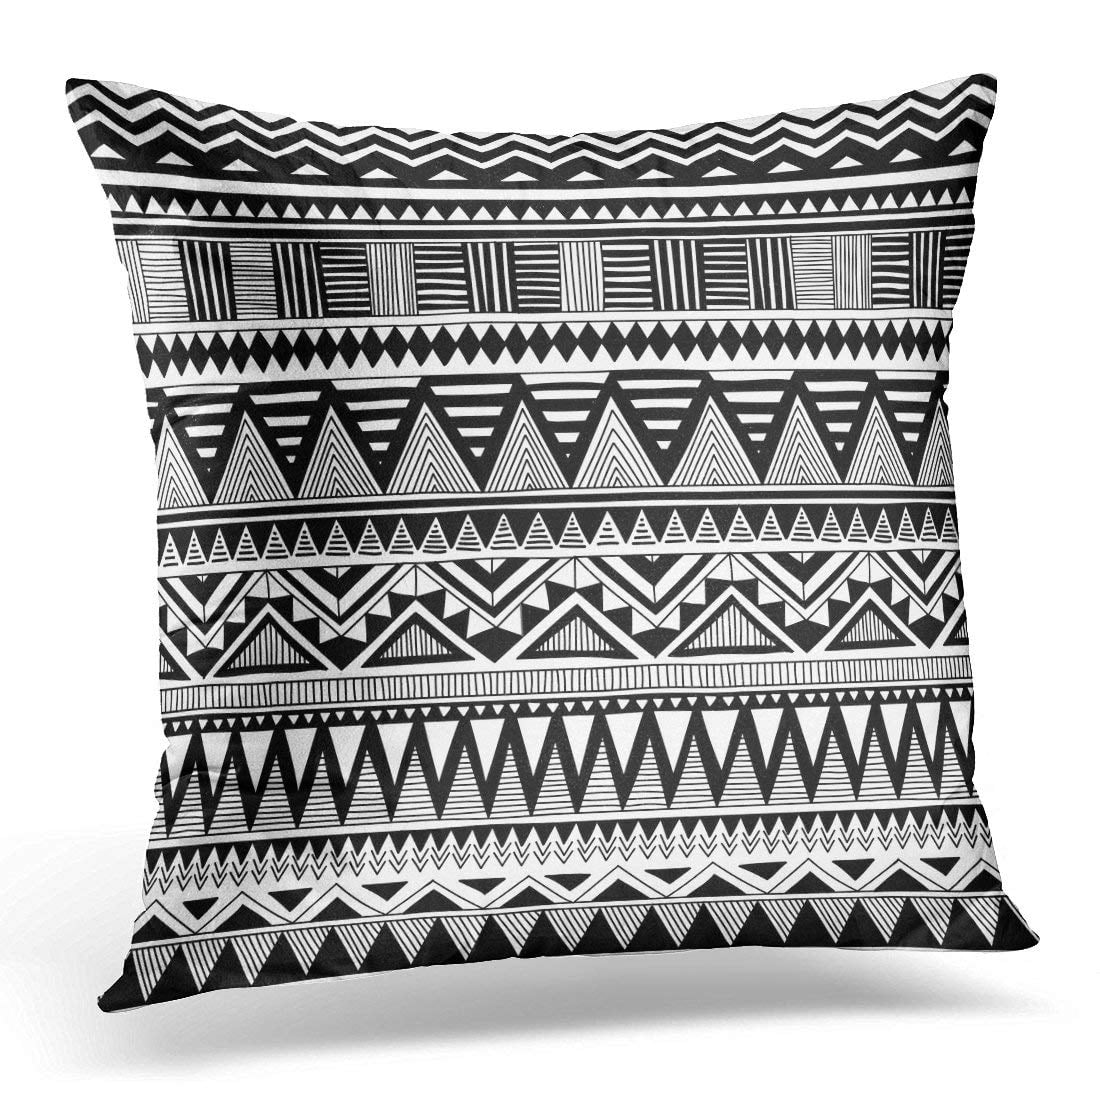 Ethnic Style Cushion Cover African Tribal Geometric Pattern Decorative Pillow 